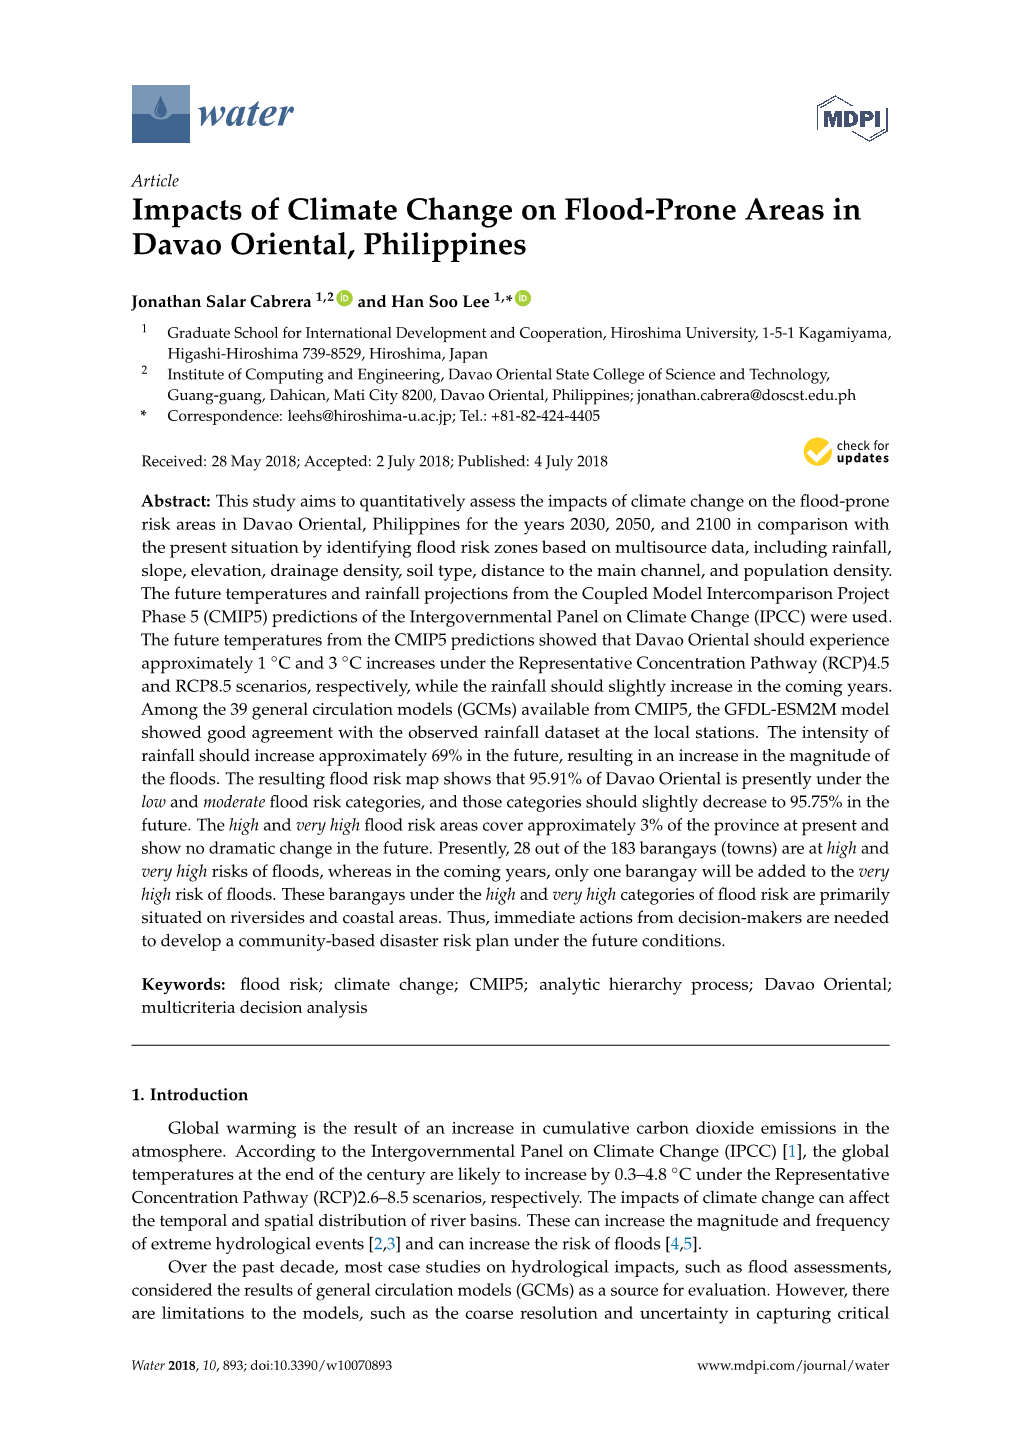 Impacts of Climate Change on Flood-Prone Areas in Davao Oriental, Philippines